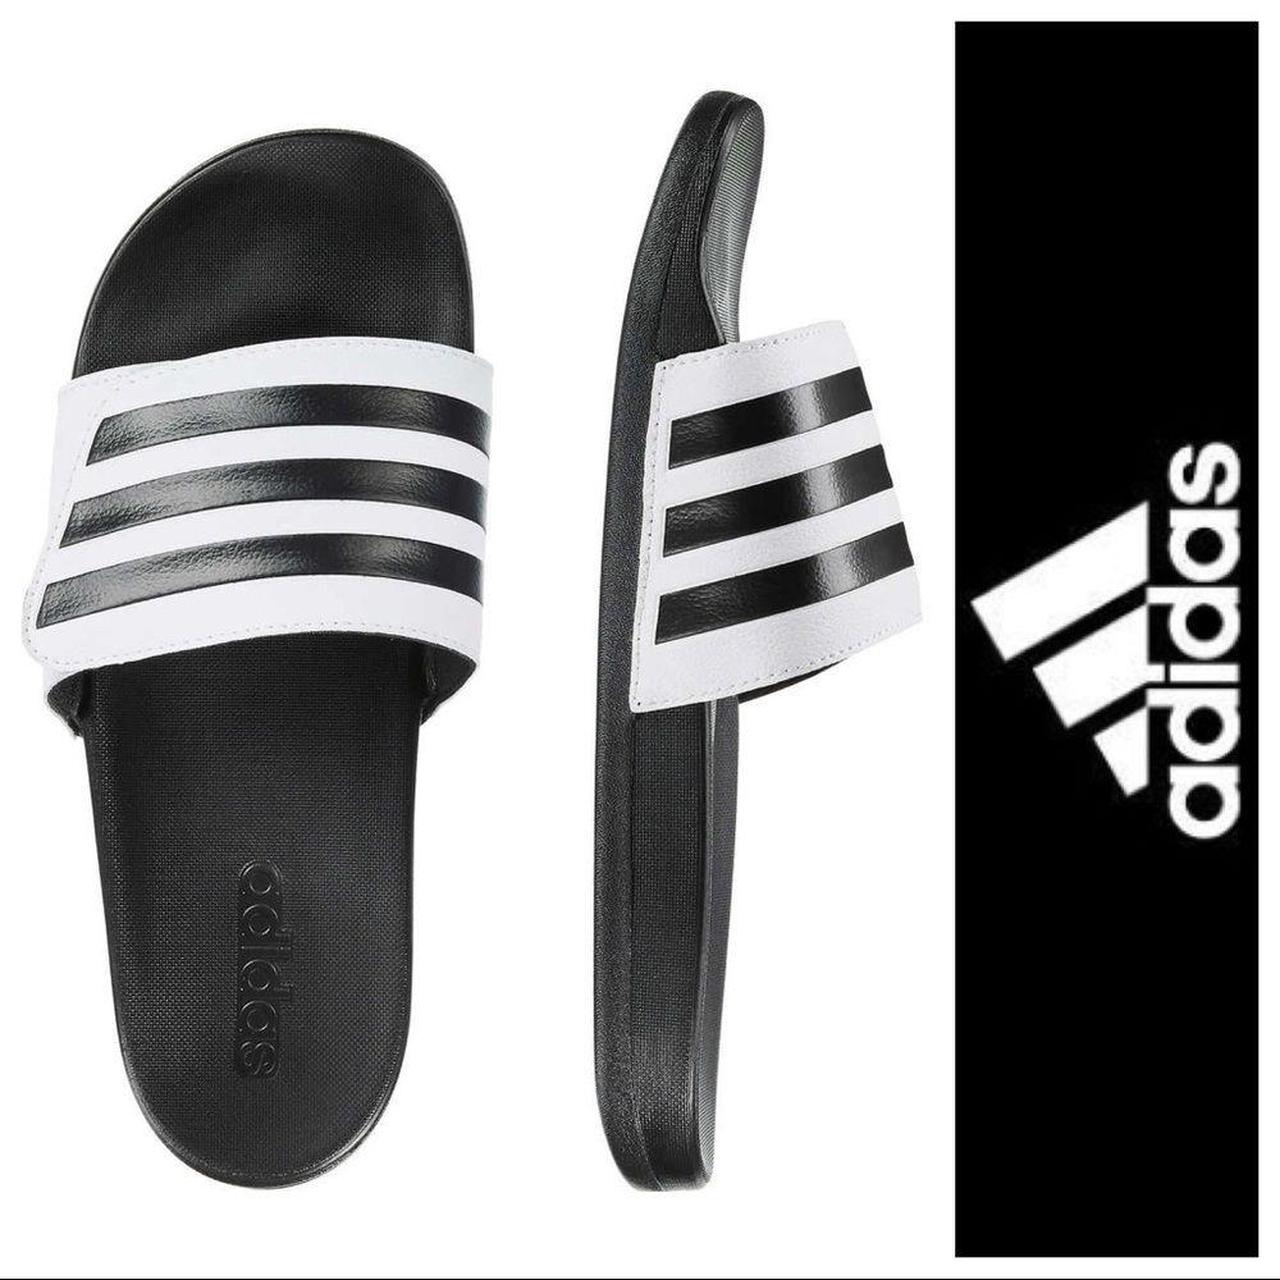 Product Image 1 - Features:                
* Brand Name: Adidas®
*